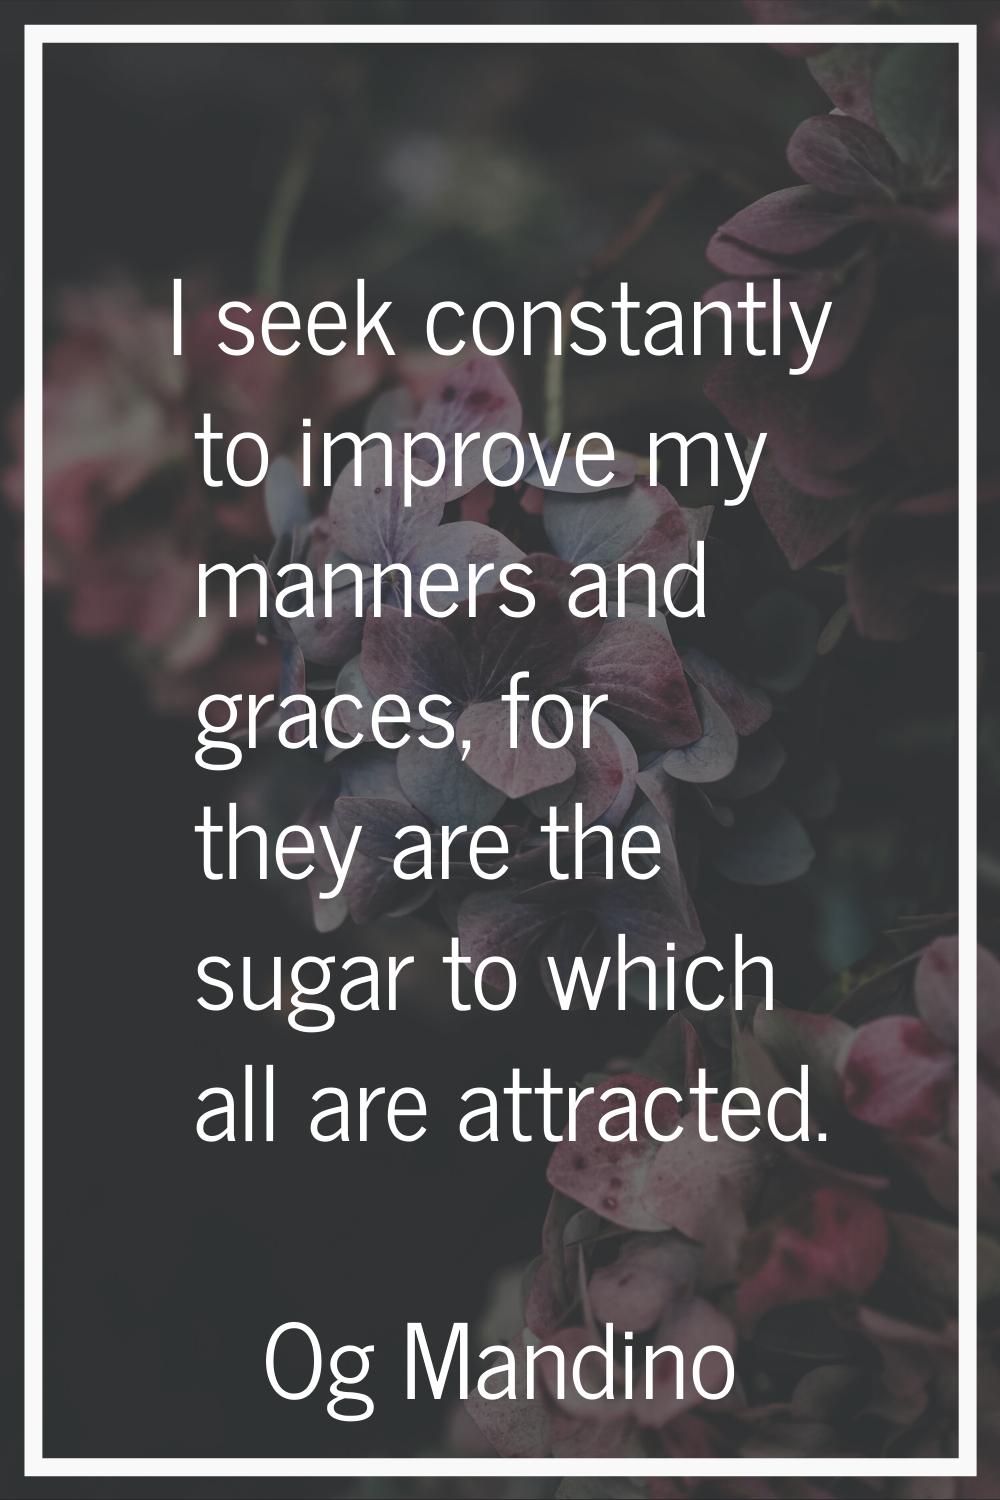 I seek constantly to improve my manners and graces, for they are the sugar to which all are attract